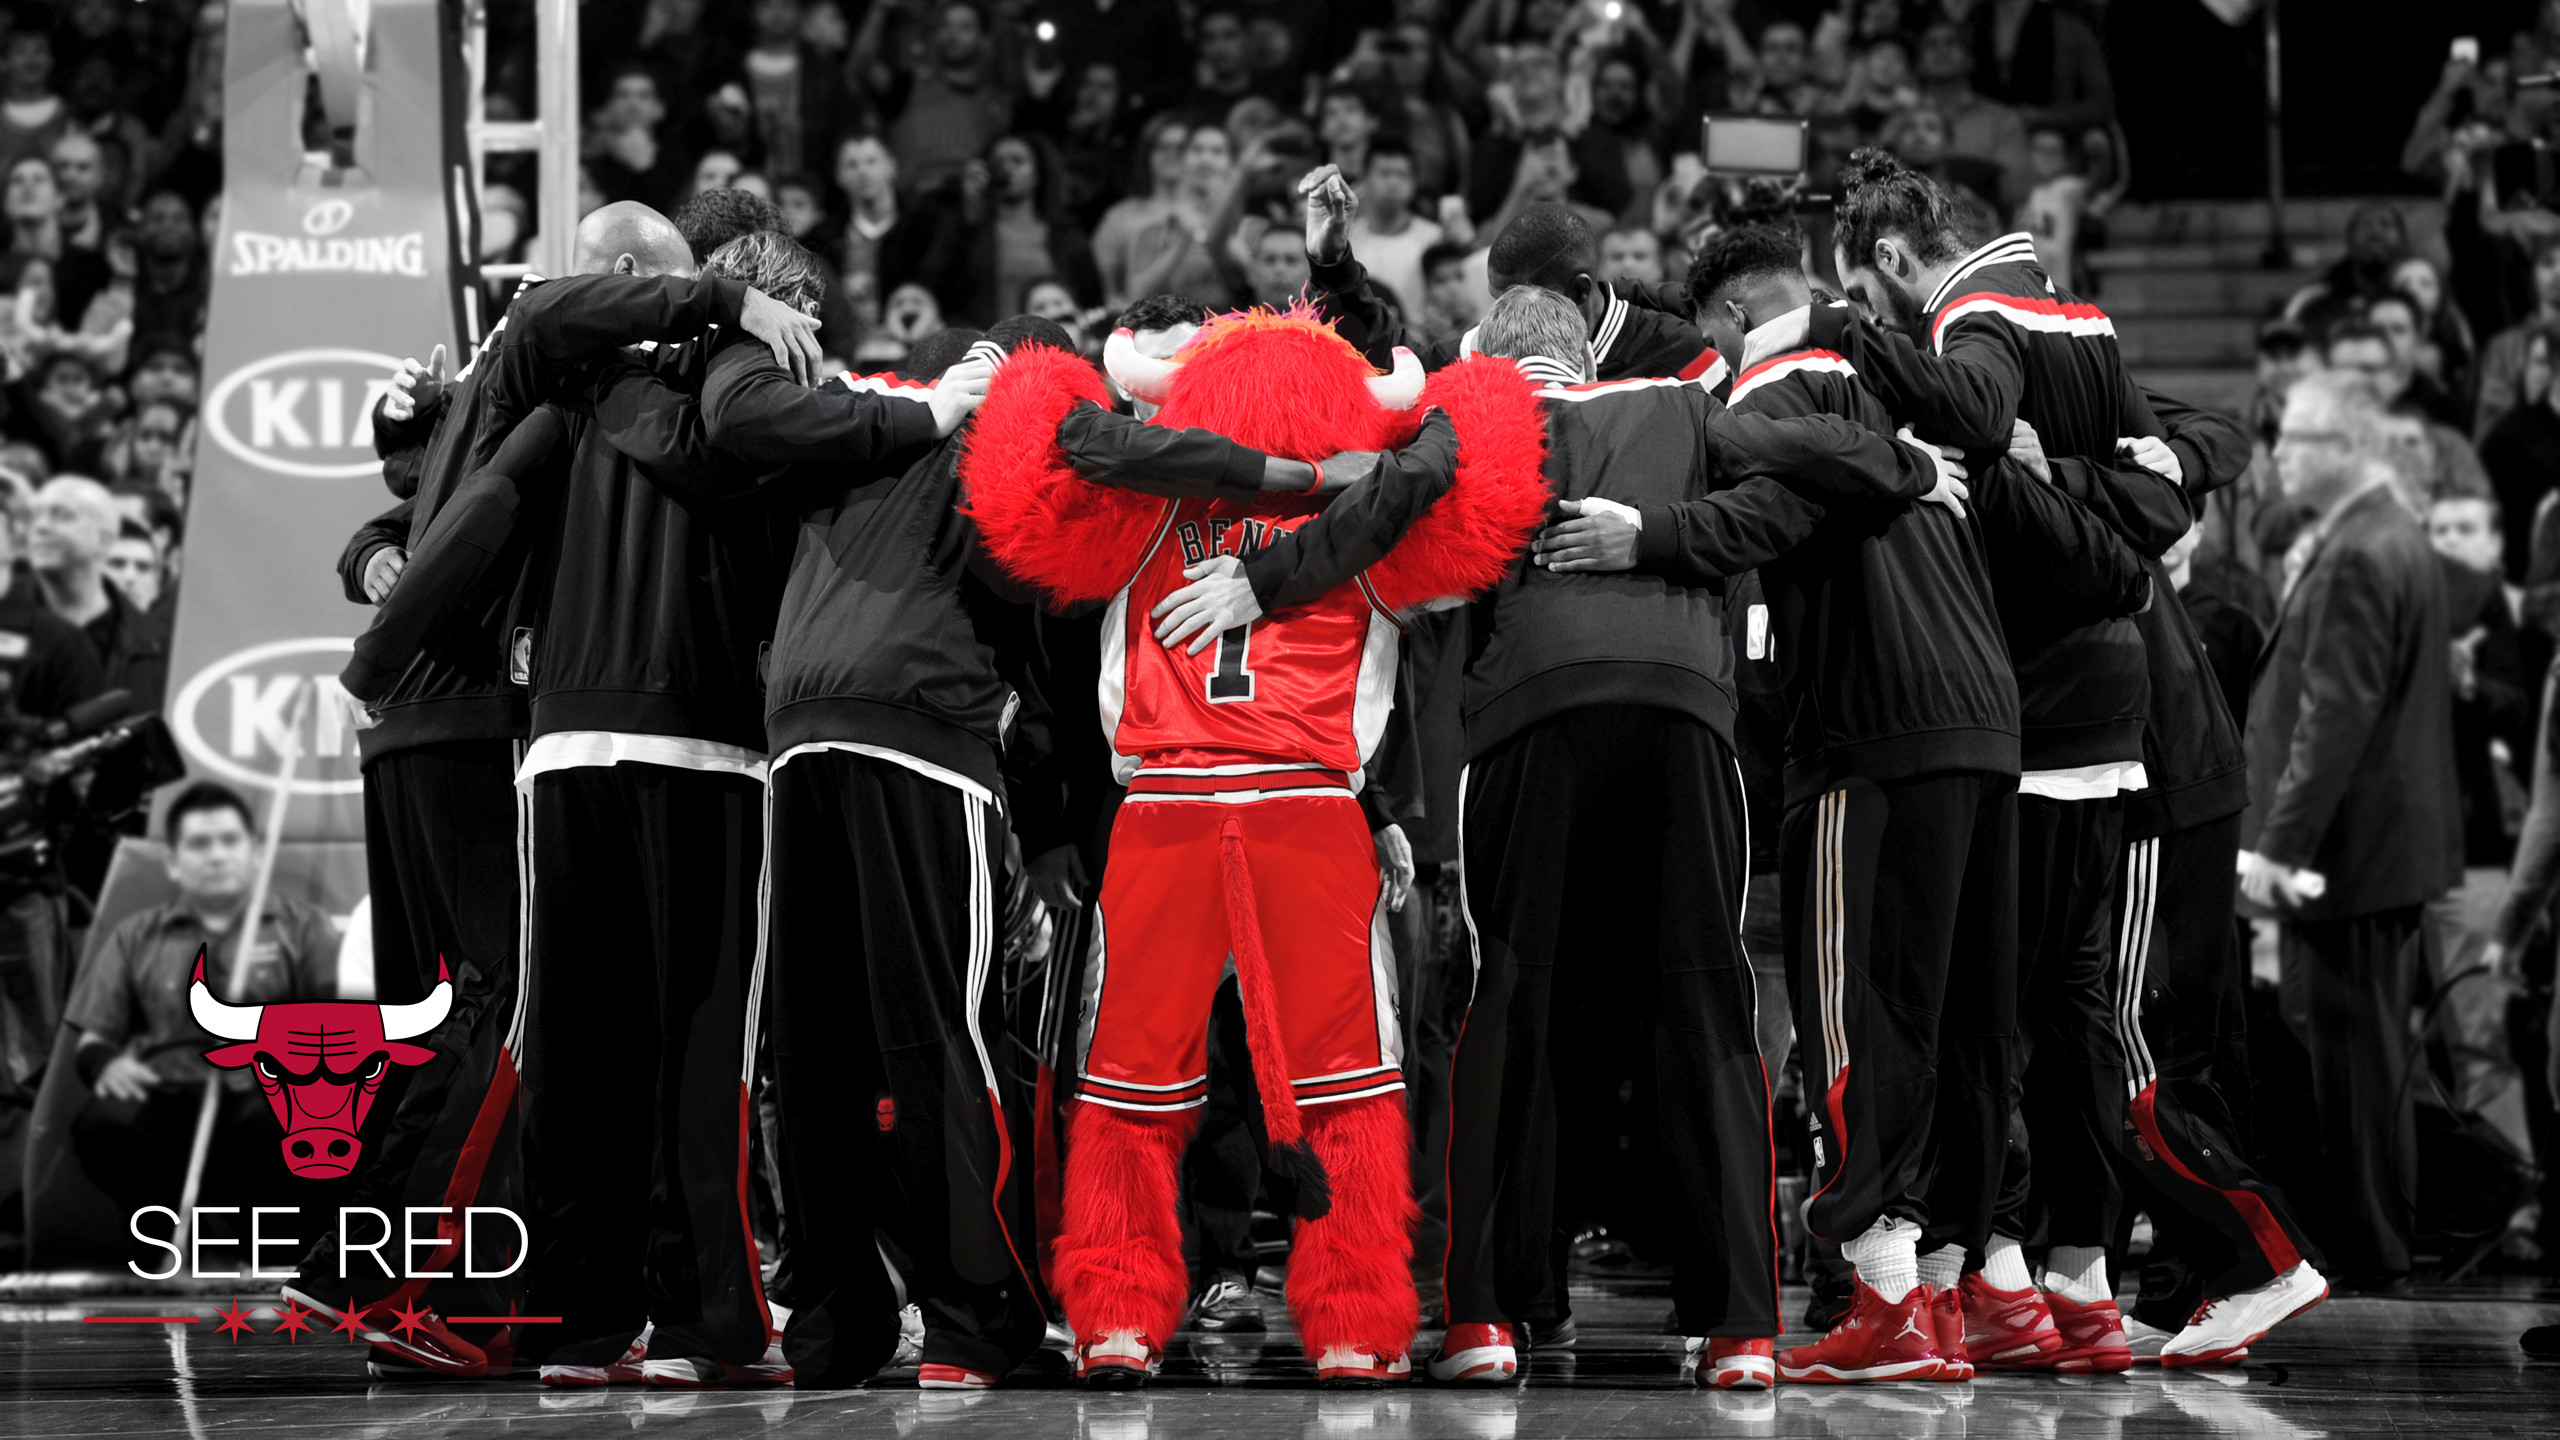 2560x1440 SEE RED - Huddle